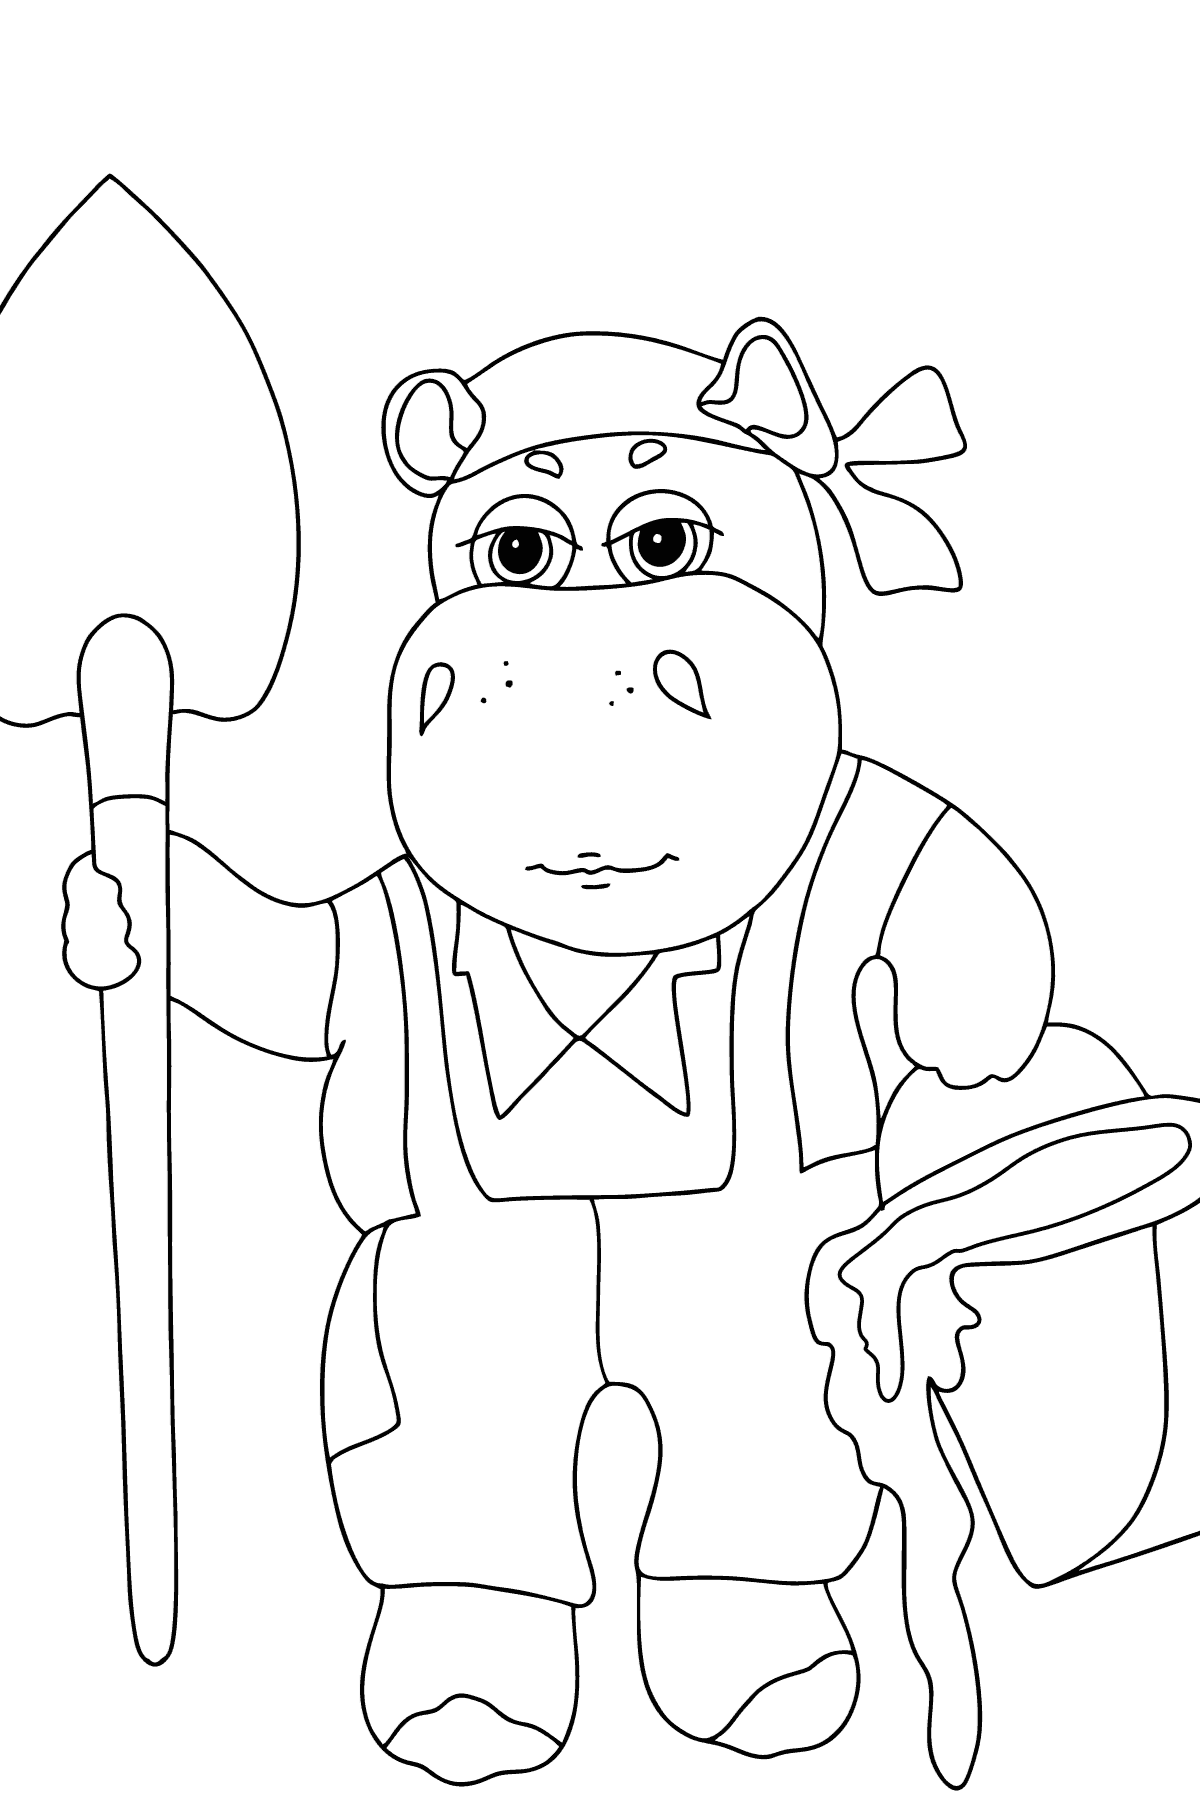 Hippopotam in the garden (simple) coloring page - Coloring Pages for Kids